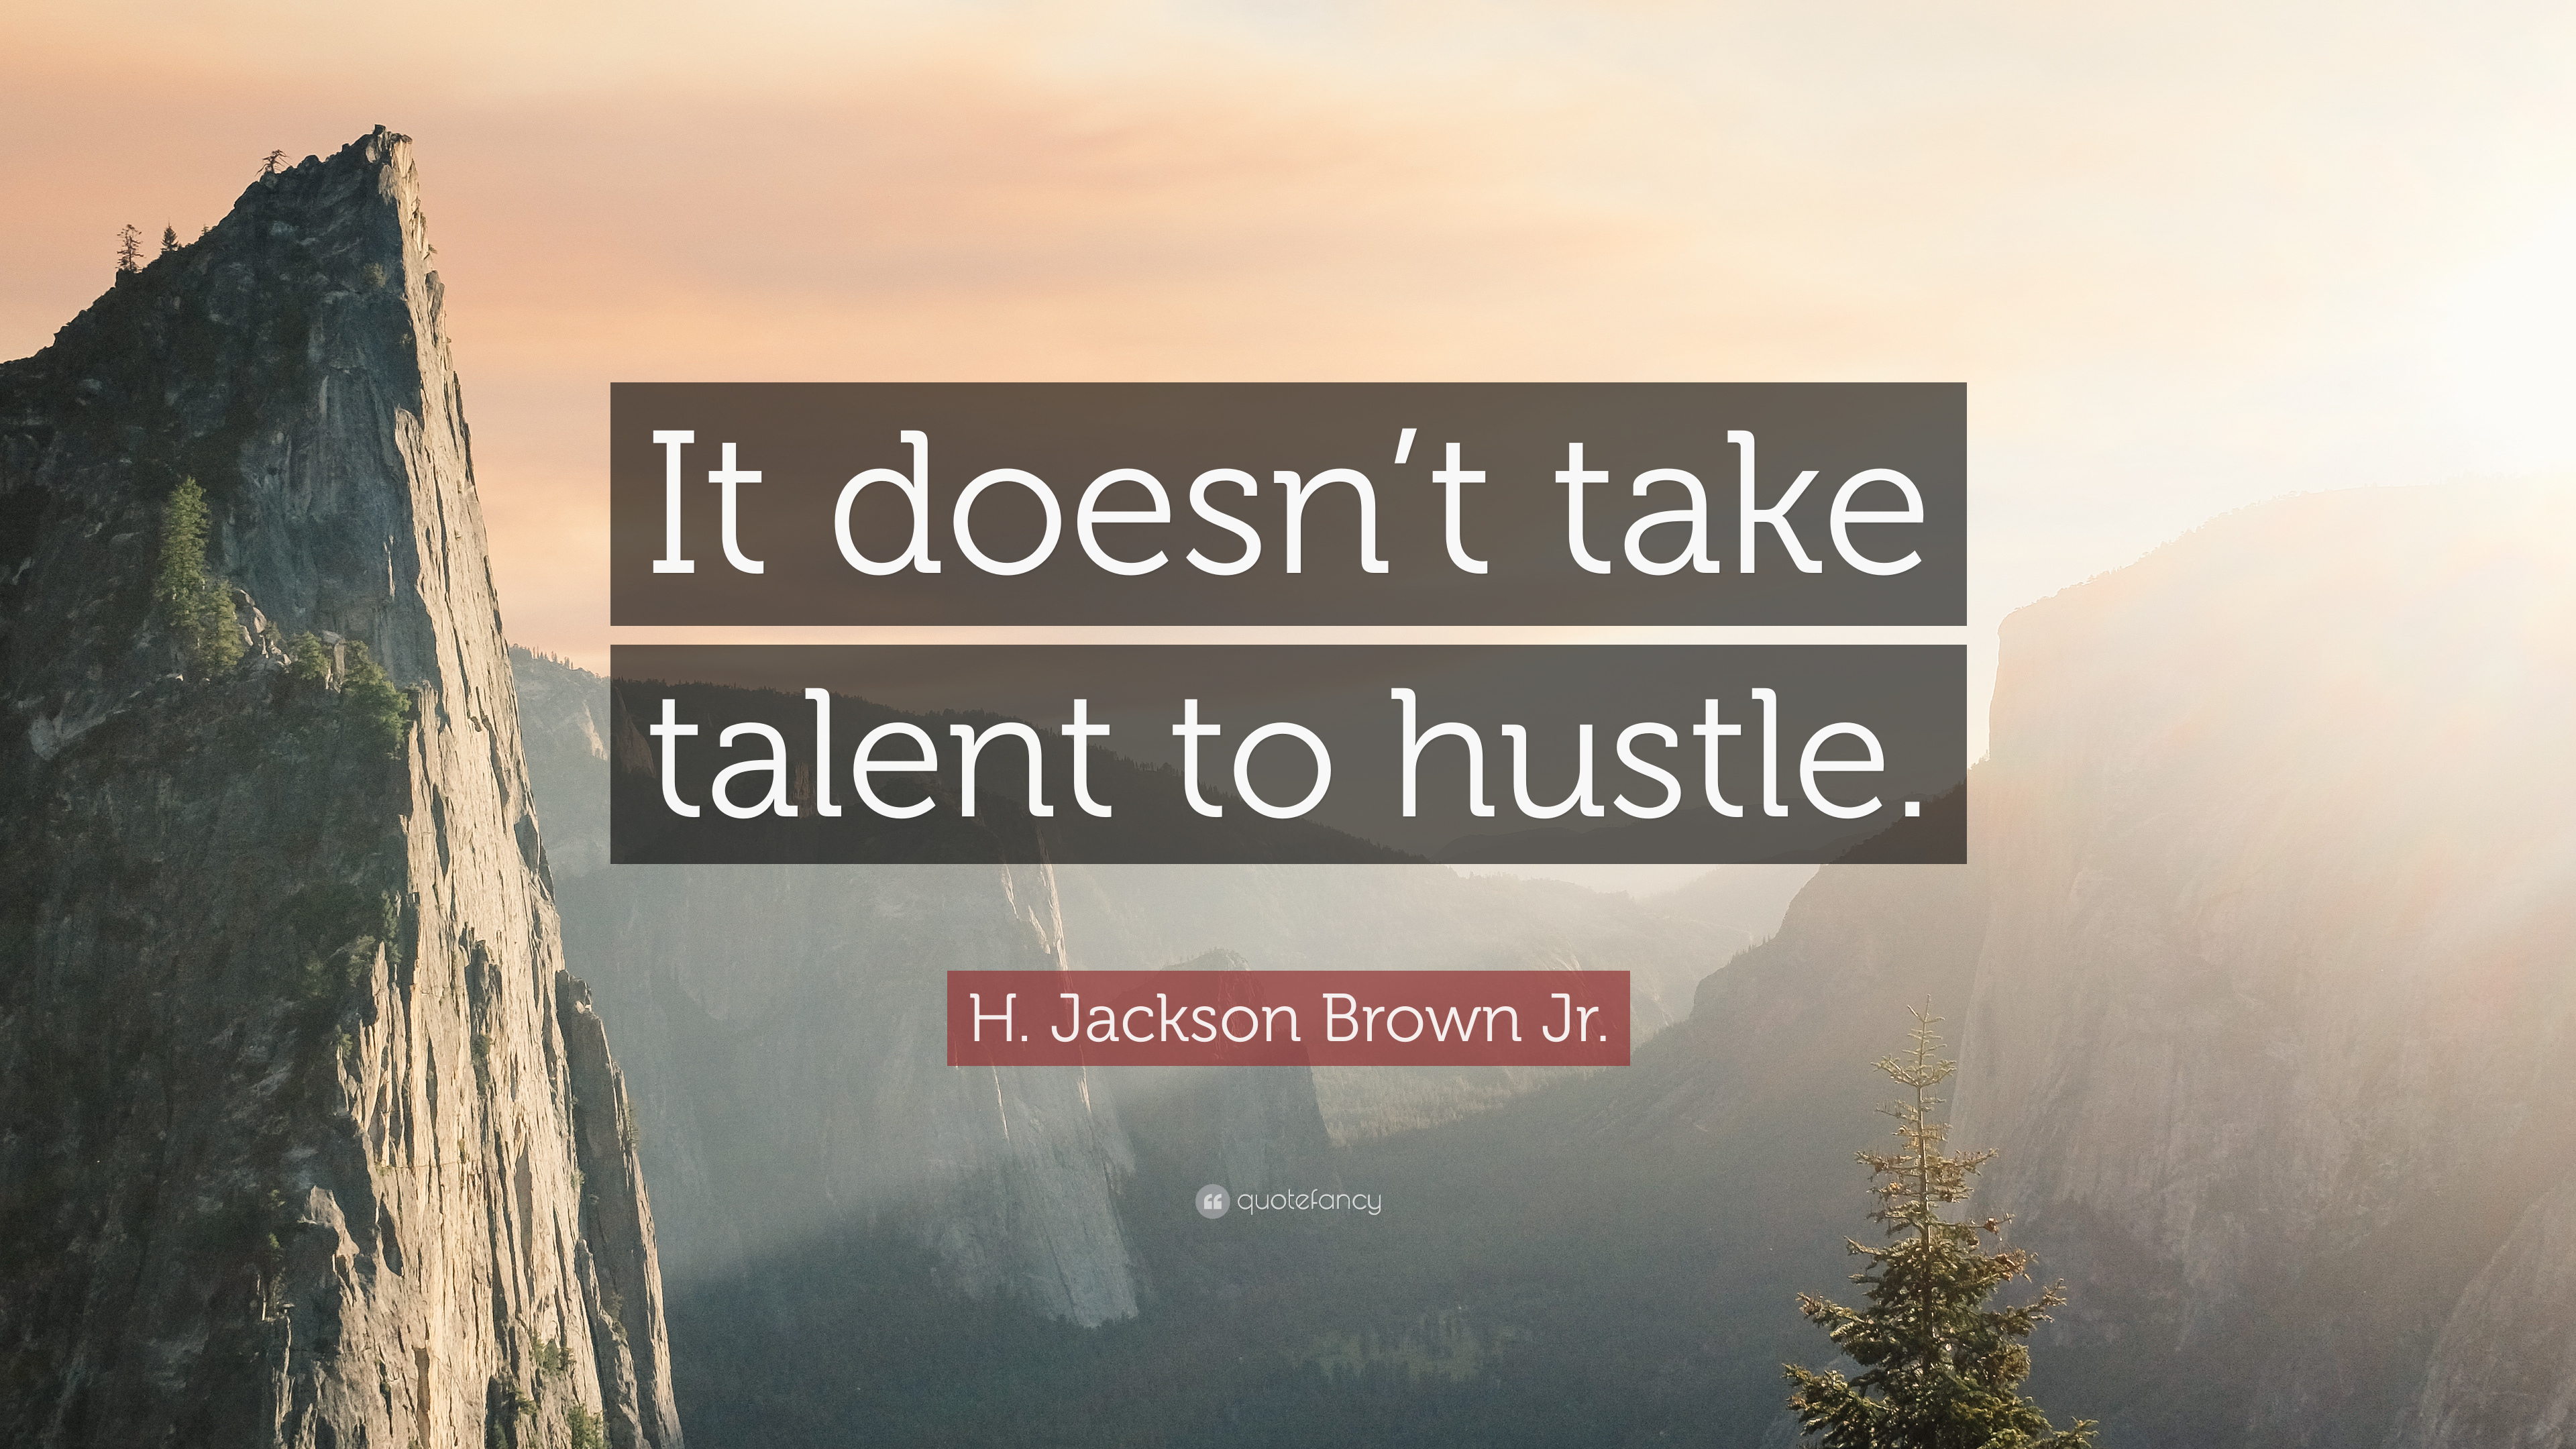 H. Jackson Brown Jr. Quote: “It doesn't take talent to hustle.”